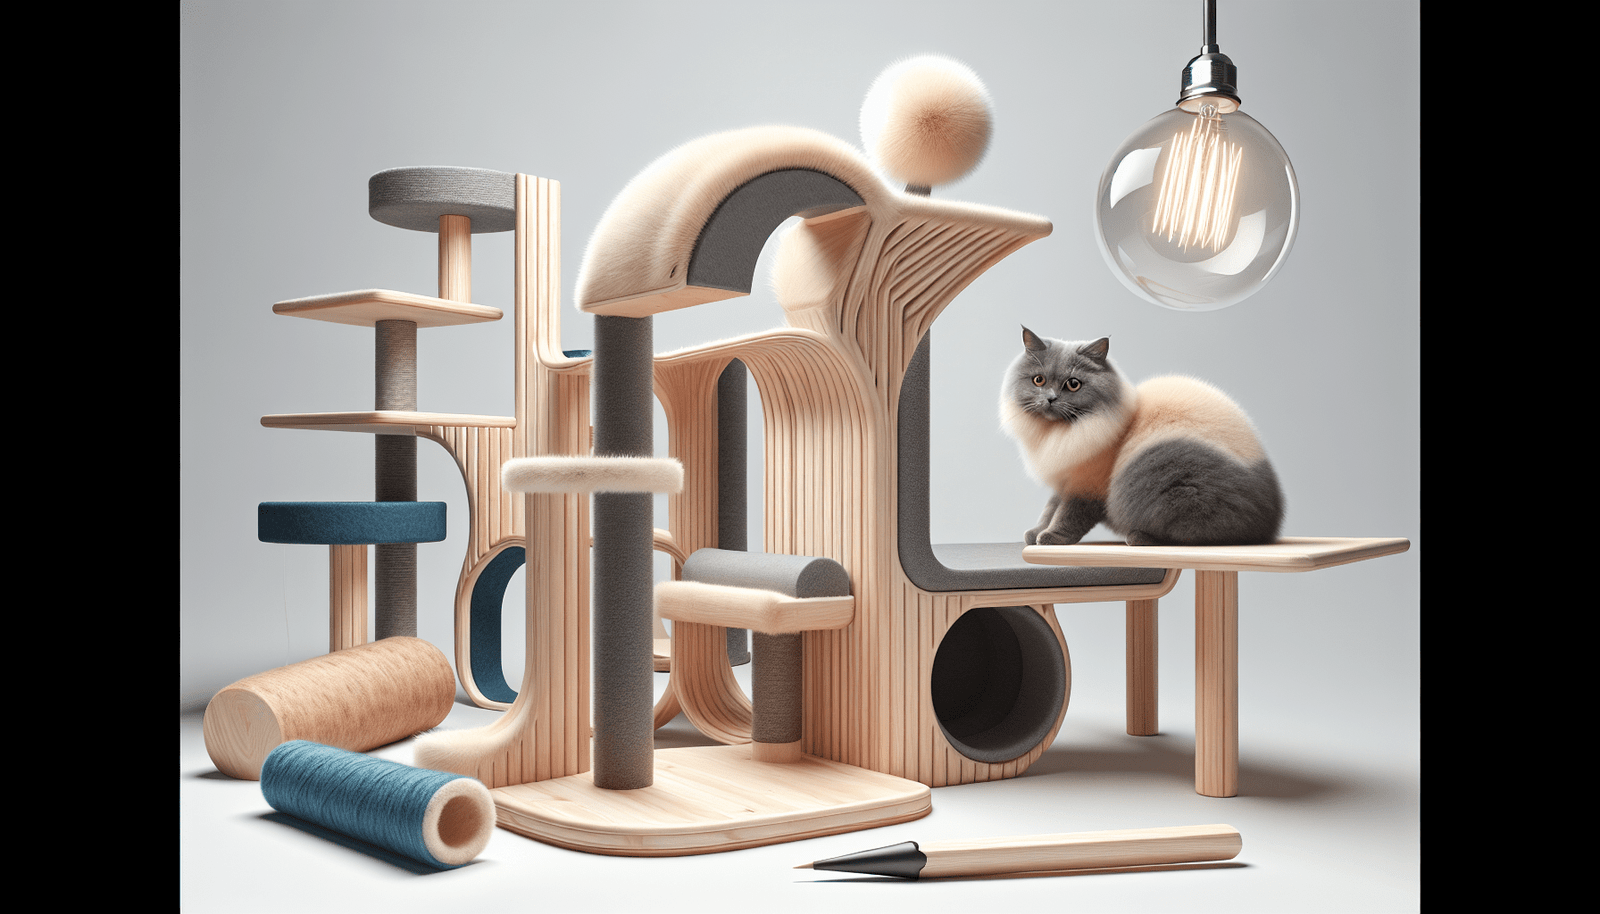 Getting Creative With Cat Furniture Sets: Unique Designs To Consider